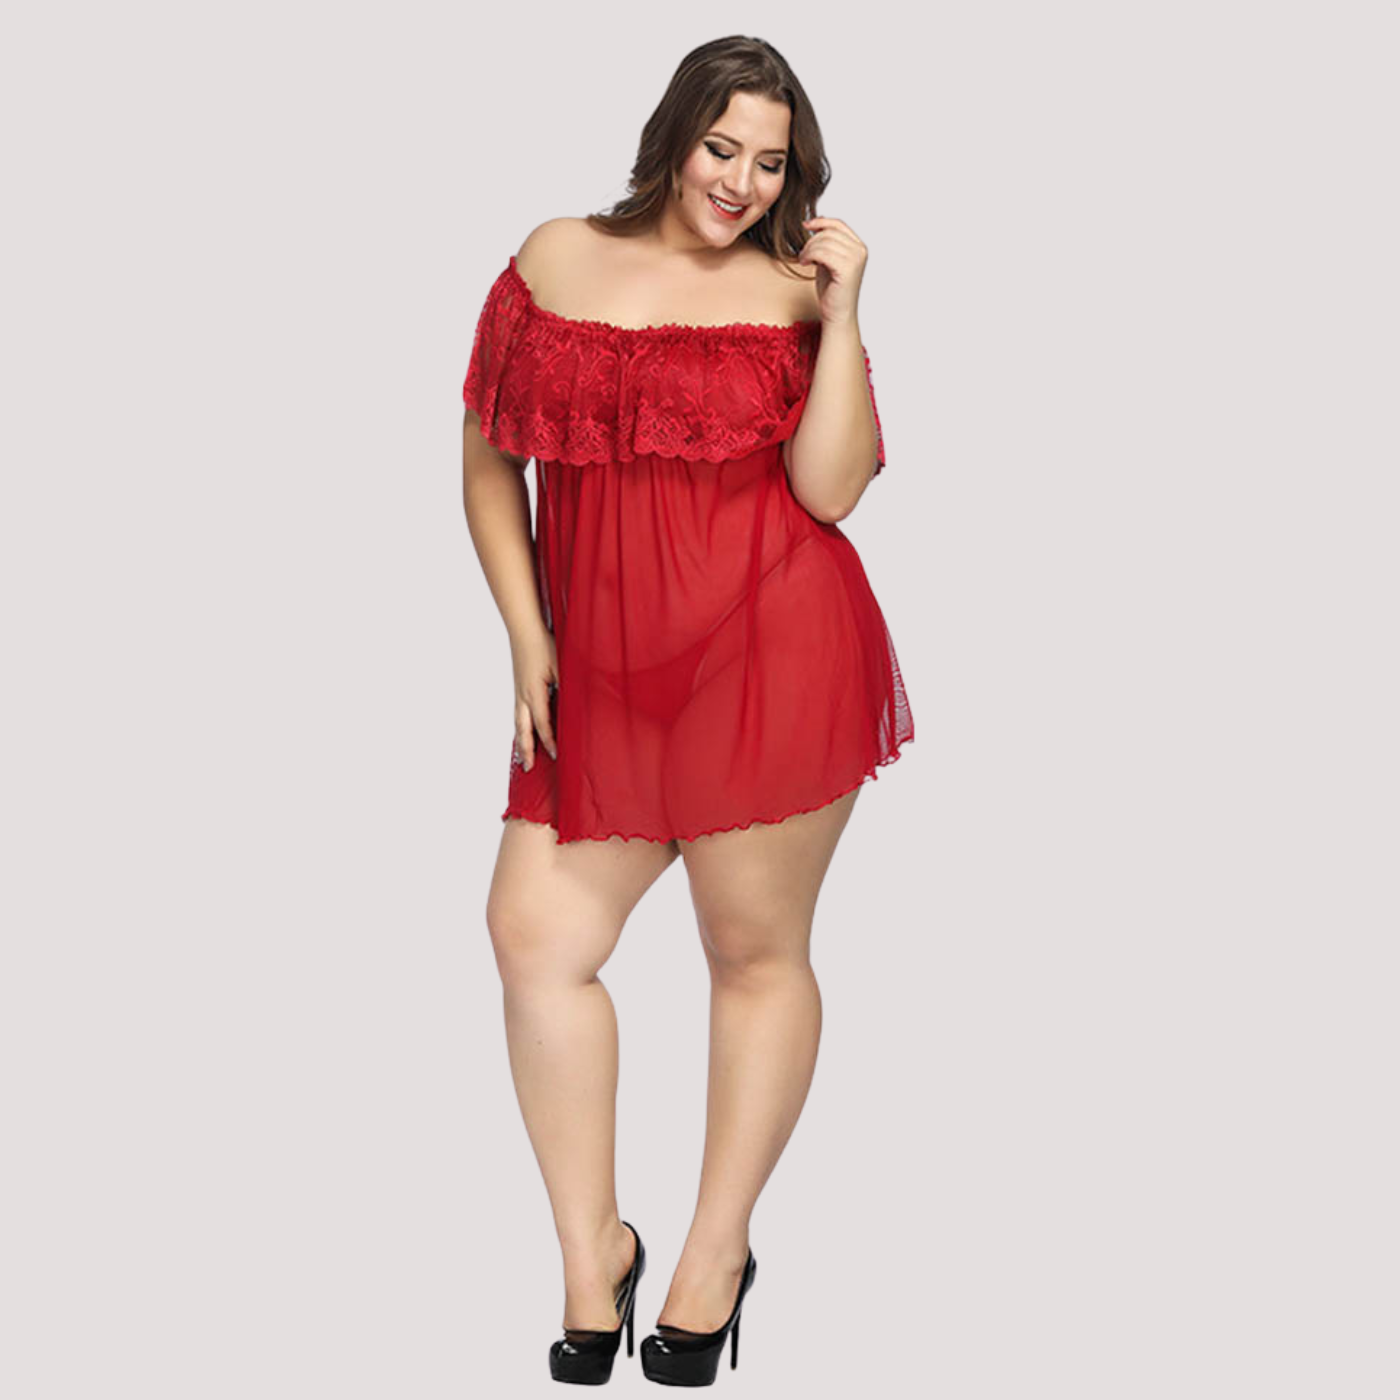 Babydoll Nightwaer wholesale dropshipping supplier - Snazzyway